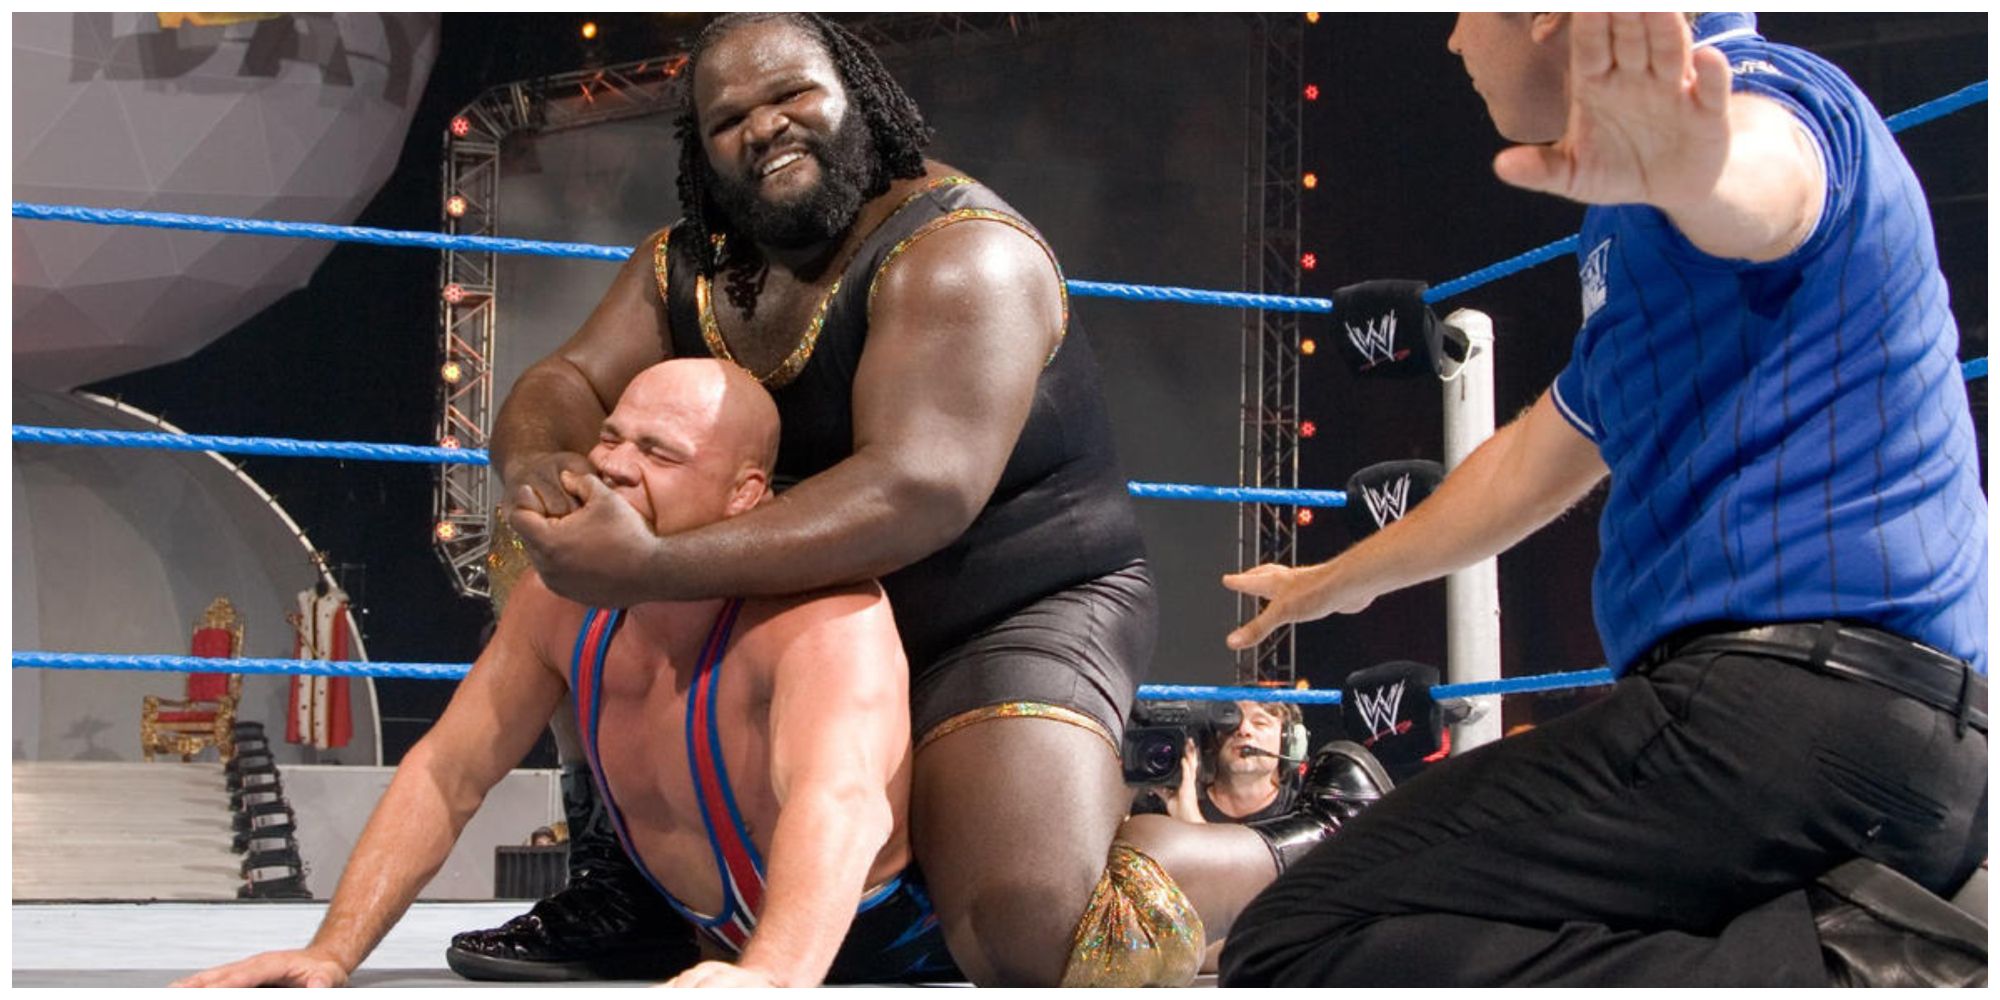 Mark Henry putting Kurt Angle in a submission hold on WWE SmackDown